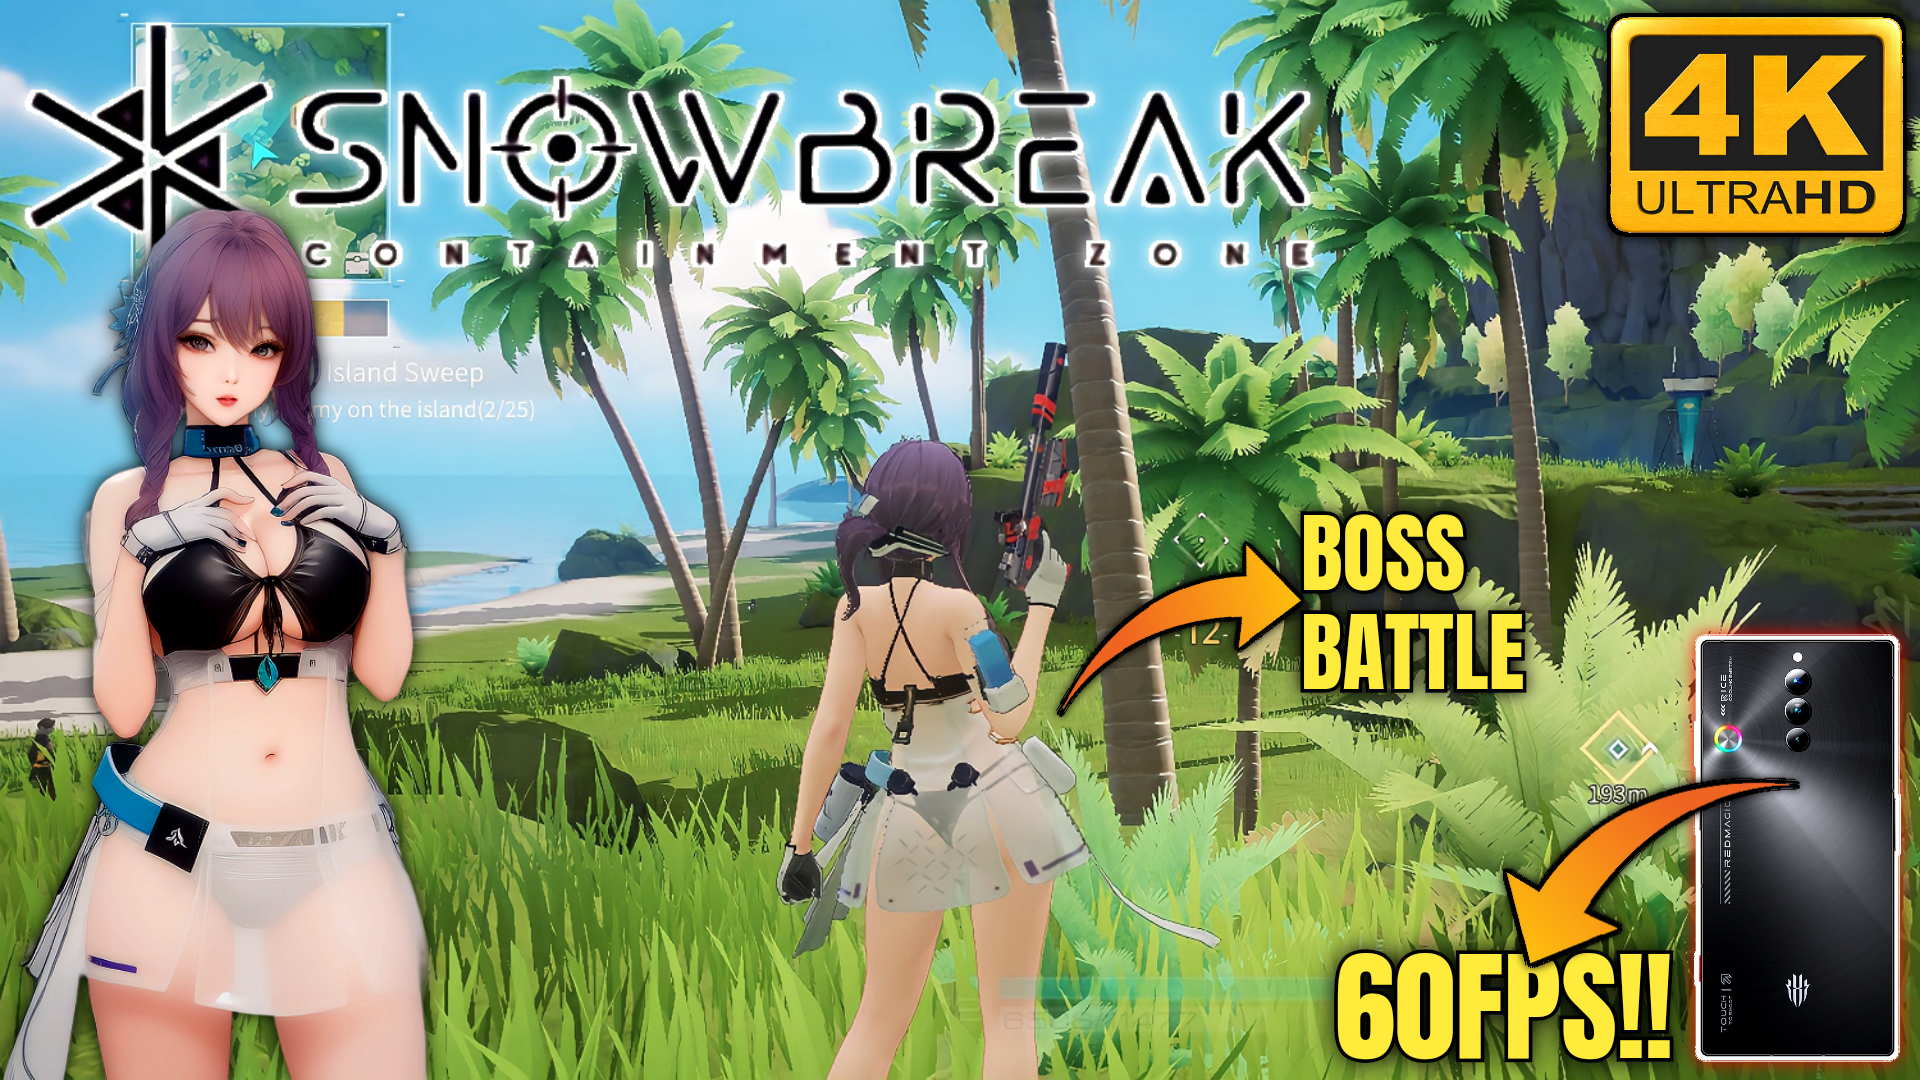 Android] Snowbreak: Containment Zone - Best 3D RPG but TPS Shooting Game  with Gacha! With cool waifus!